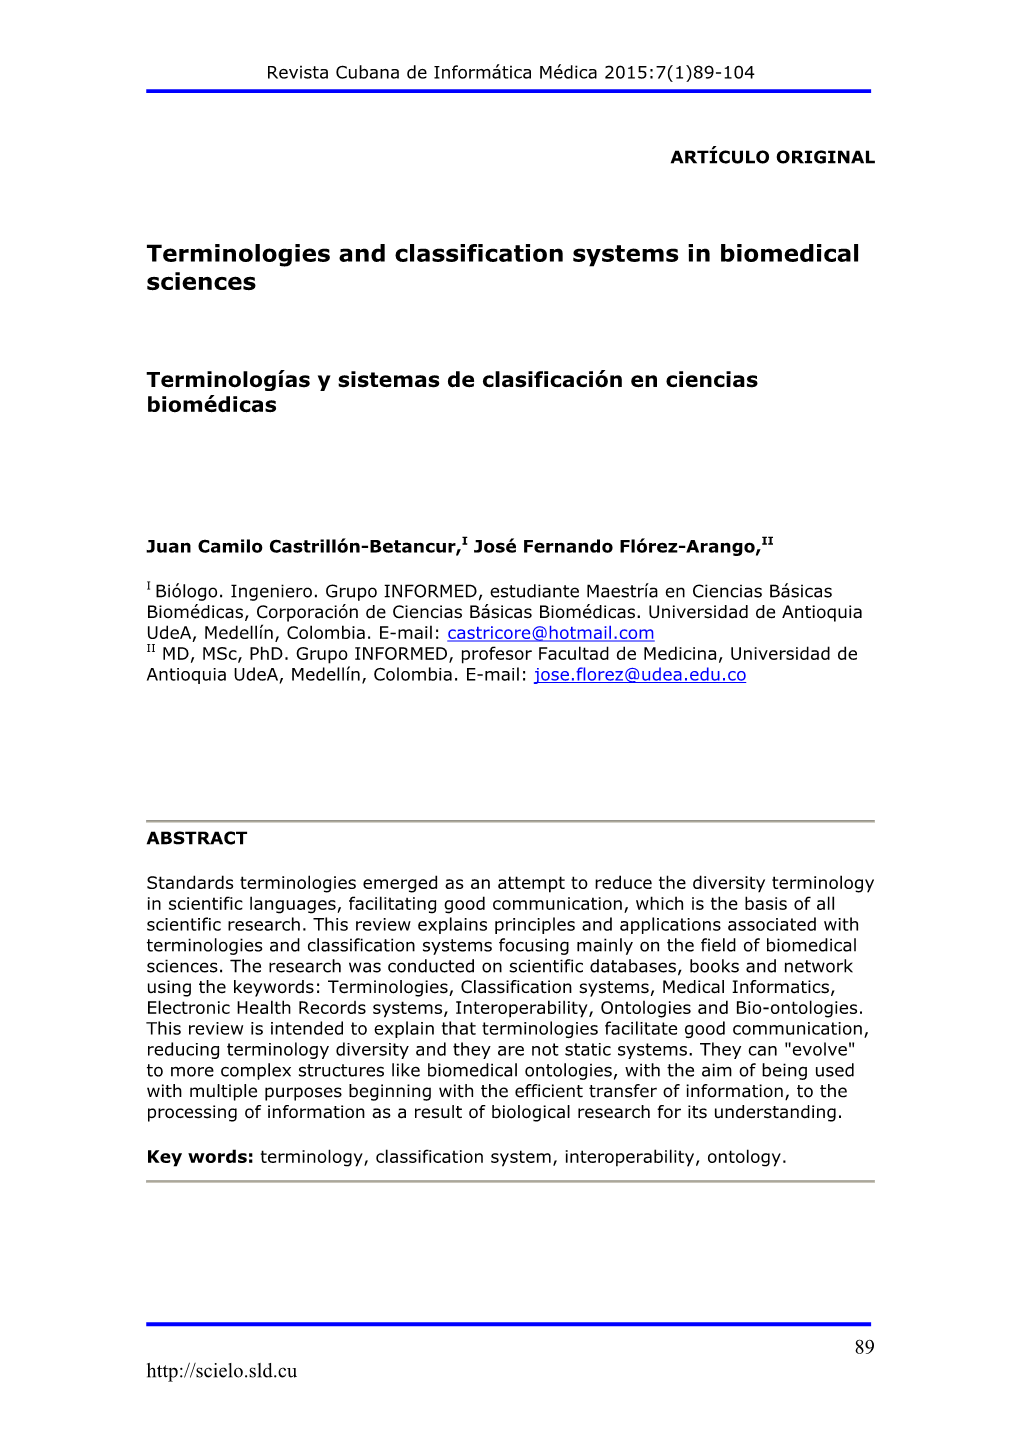 Terminologies and Classification Systems in Biomedical Sciences